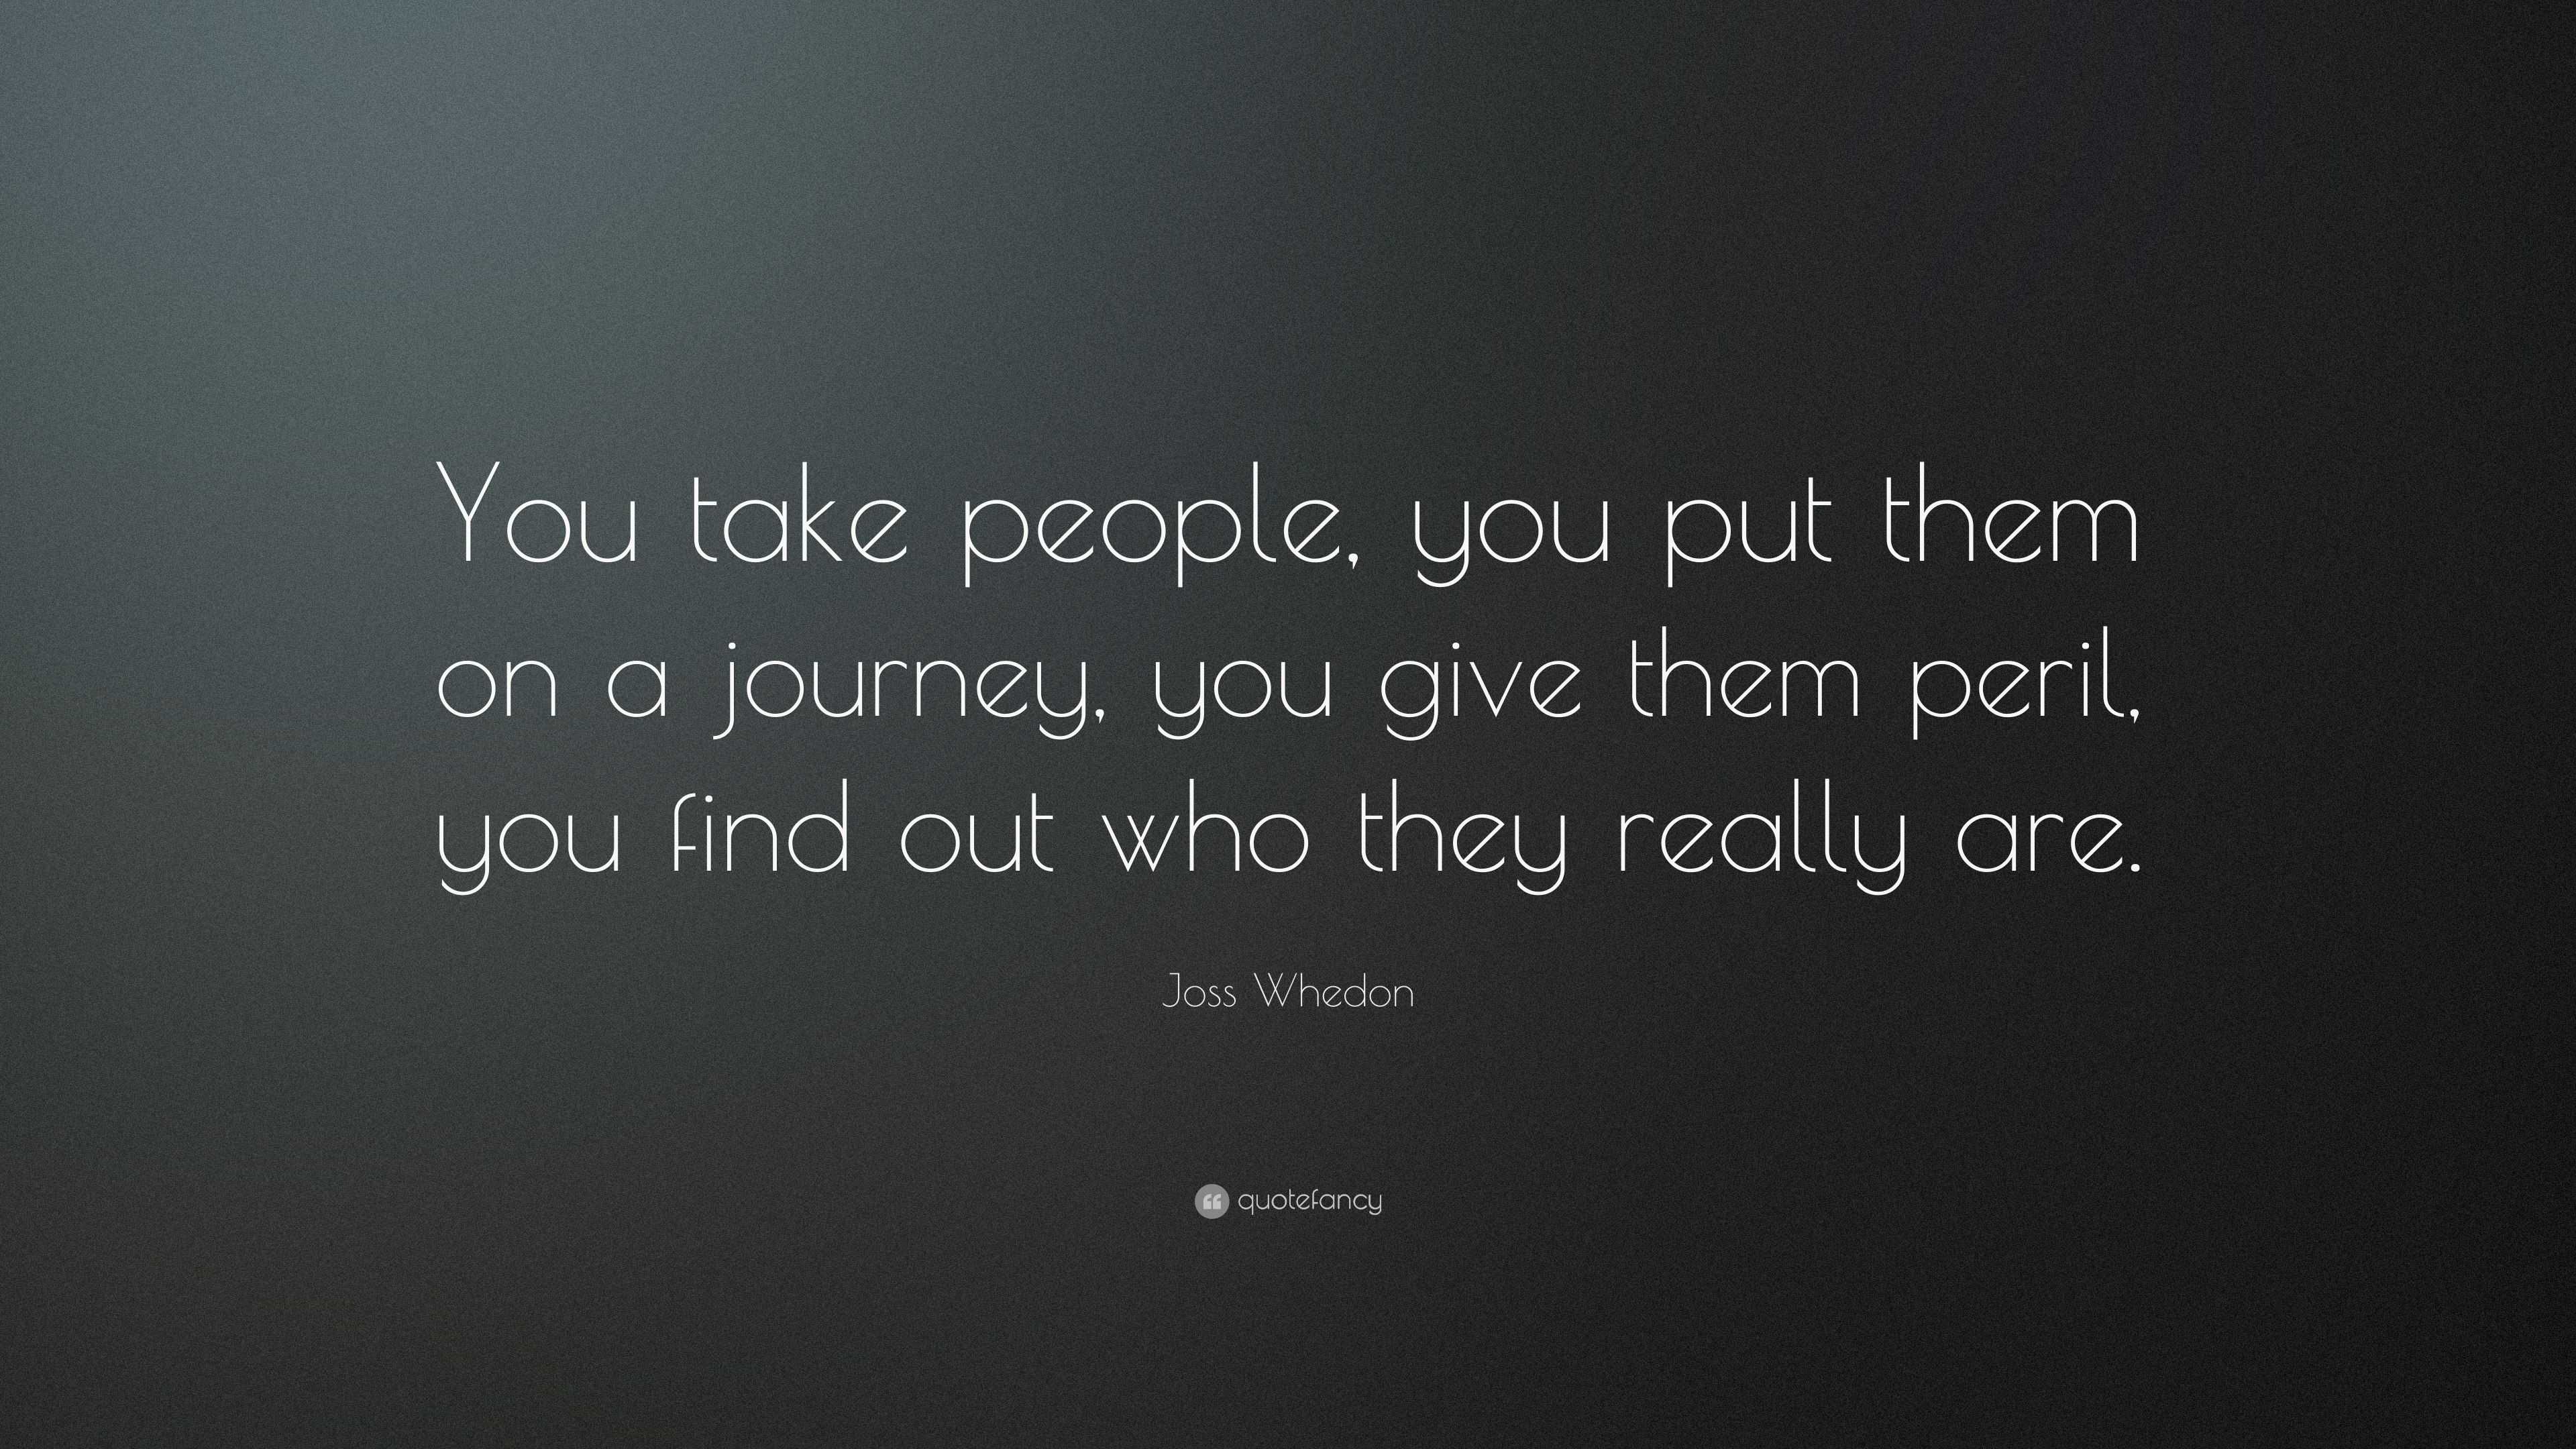 Joss Whedon Quote: “You take people, you put them on a journey, you ...